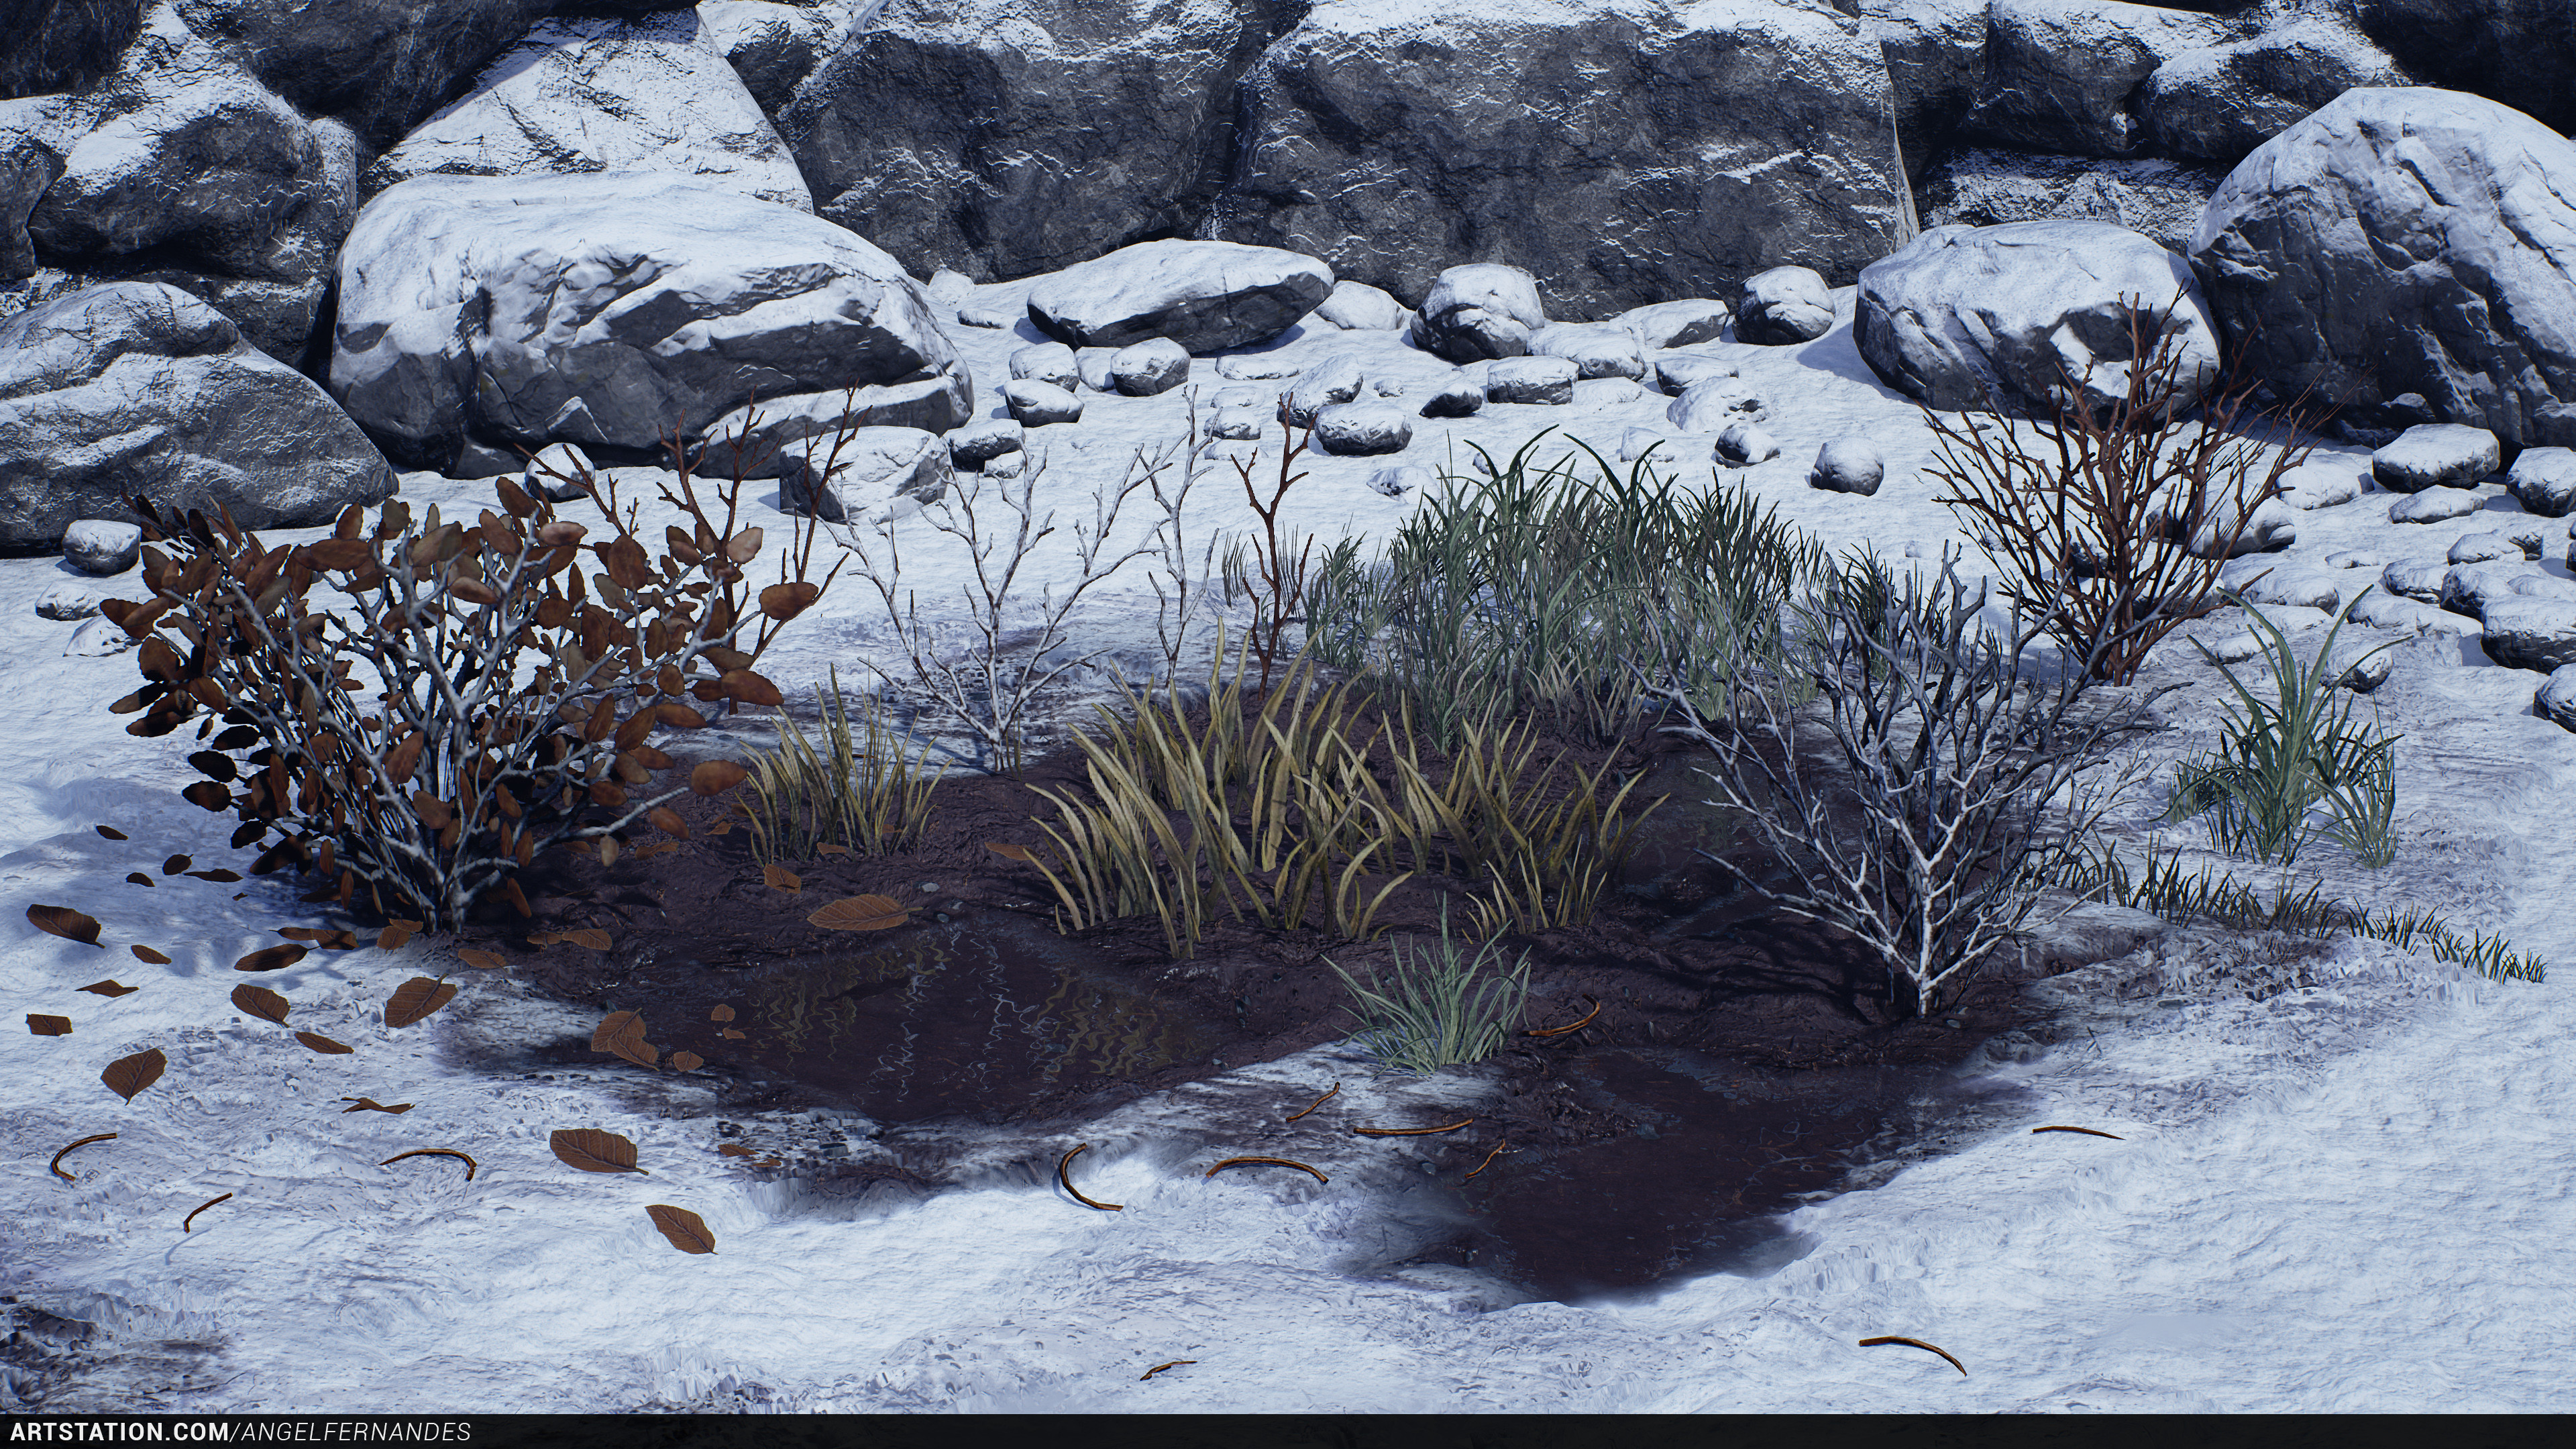 Foliage sculpted in ZBrush, baked and textured in Substance Designer. Ground materials created in SD as well..